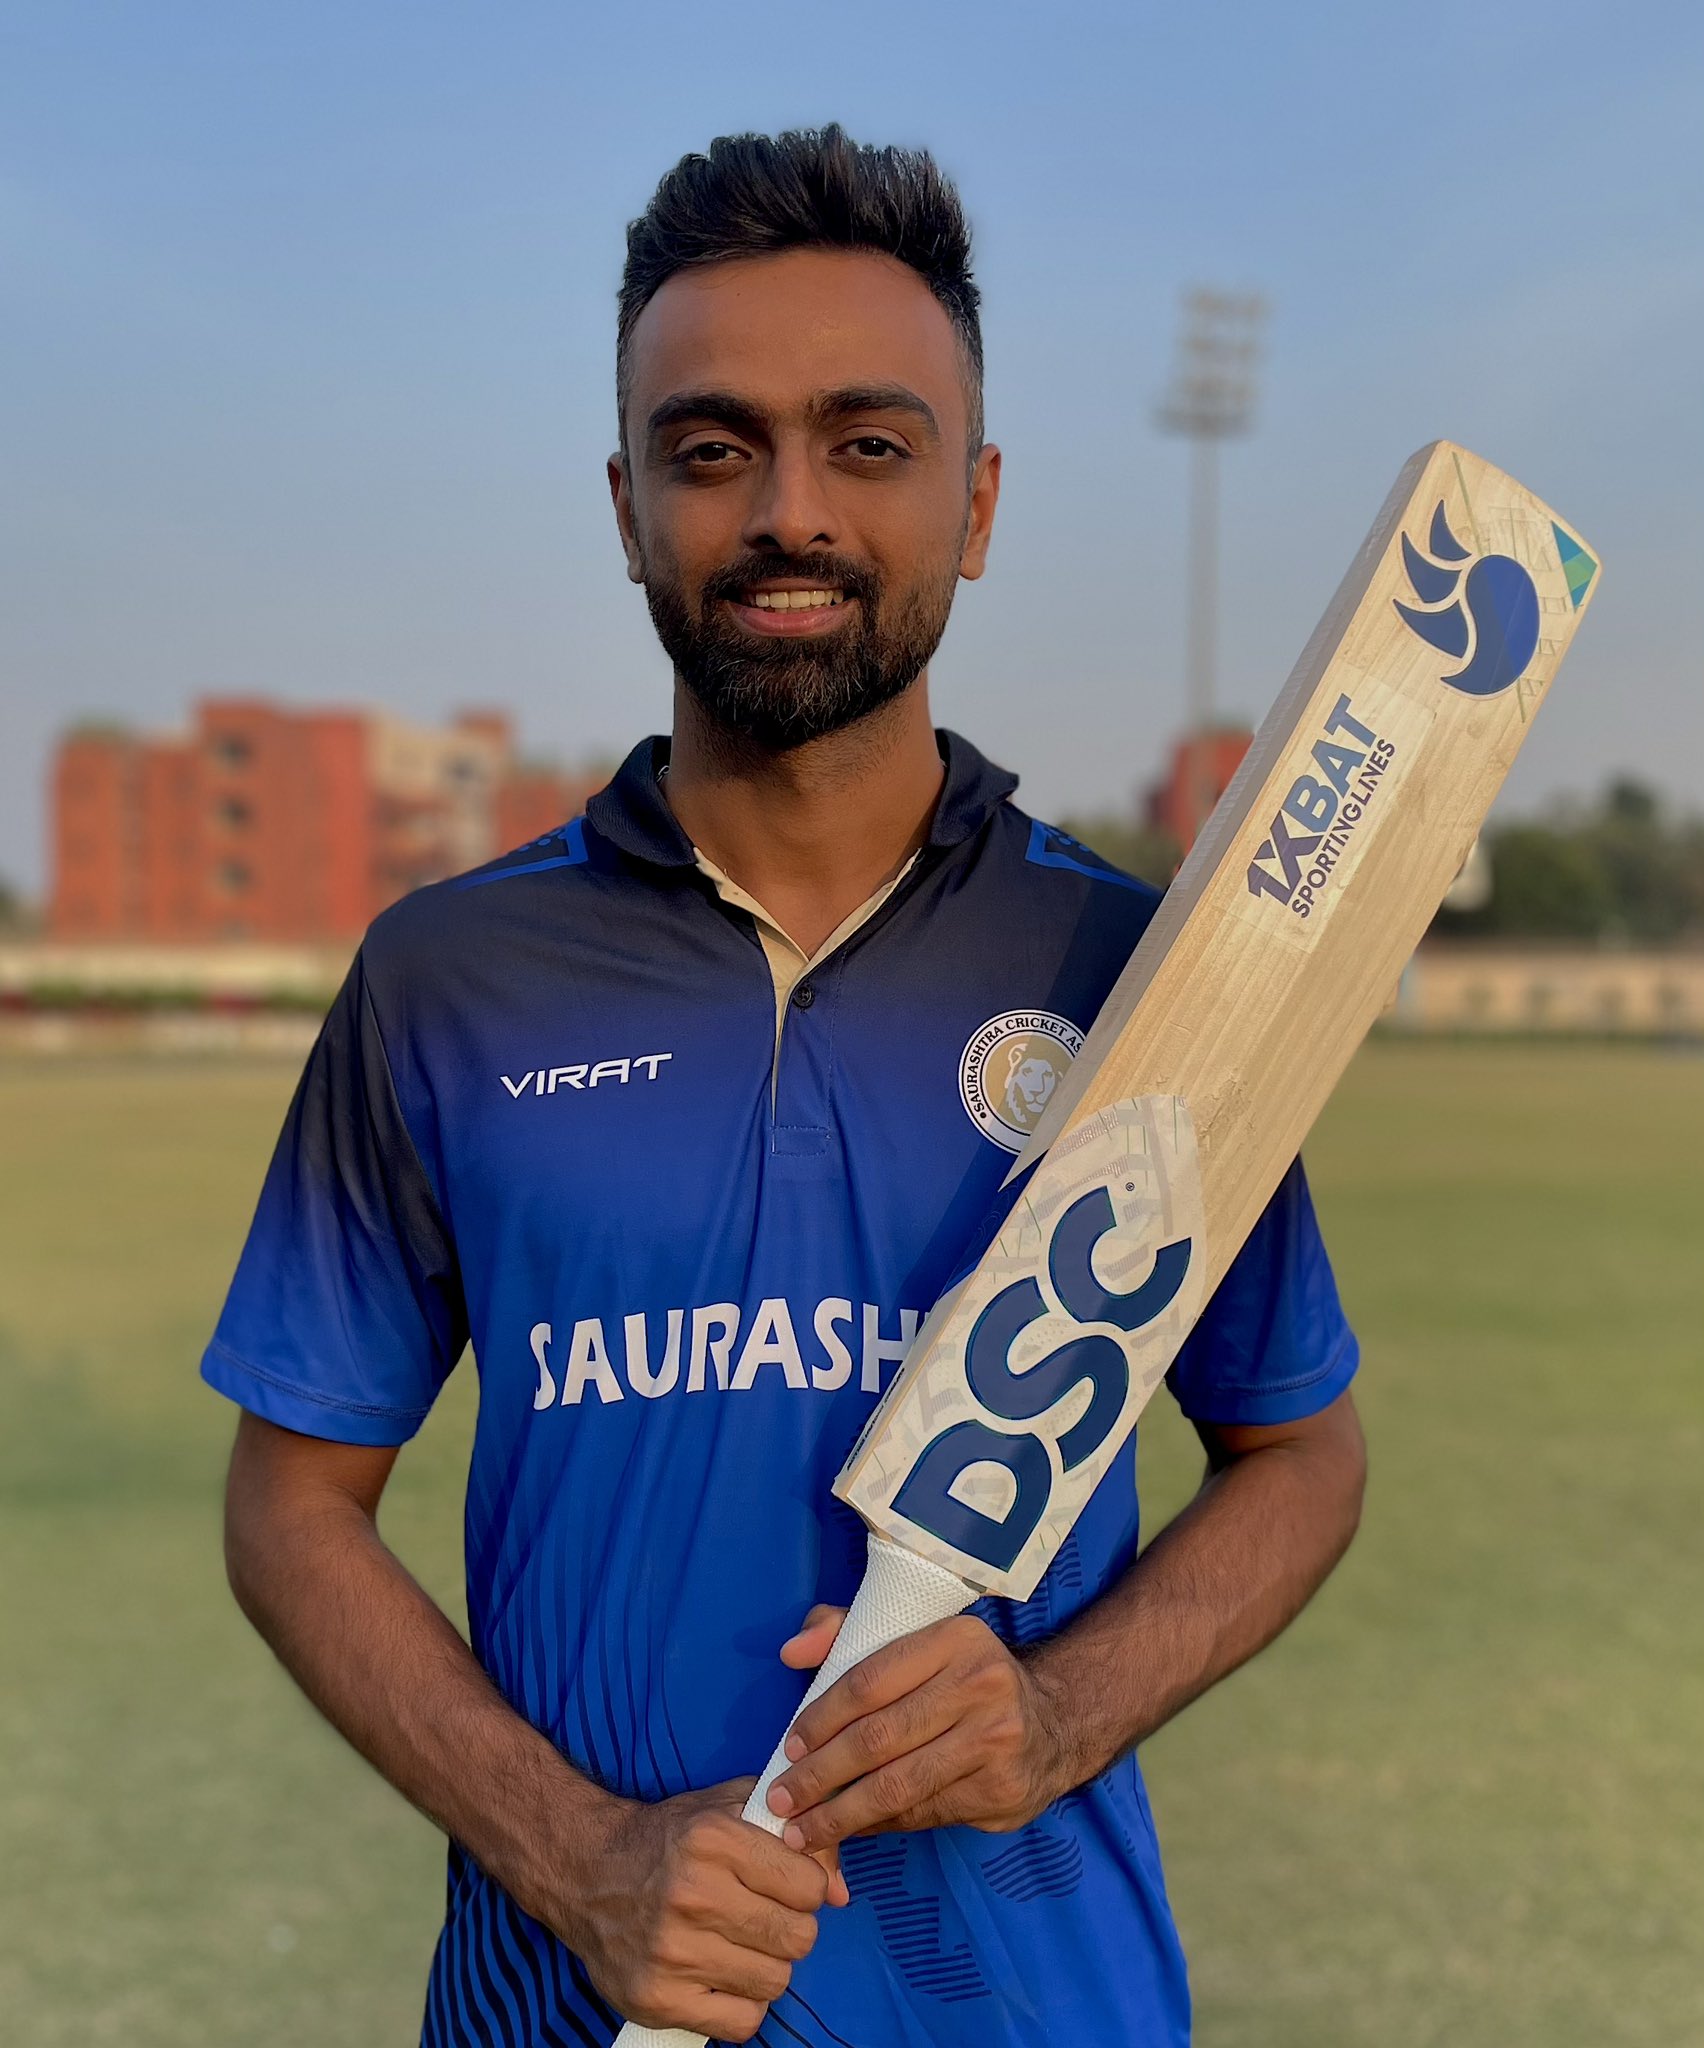 Jaydev Unadkat on Twitter: "Delighted and proud to have led Saurasthra to the tournament win! Complete team effort from everyone involved. On to the Ranji Trophy now with @1xBatSporting 🏏 #VijayHazareTrophy #1xBat #